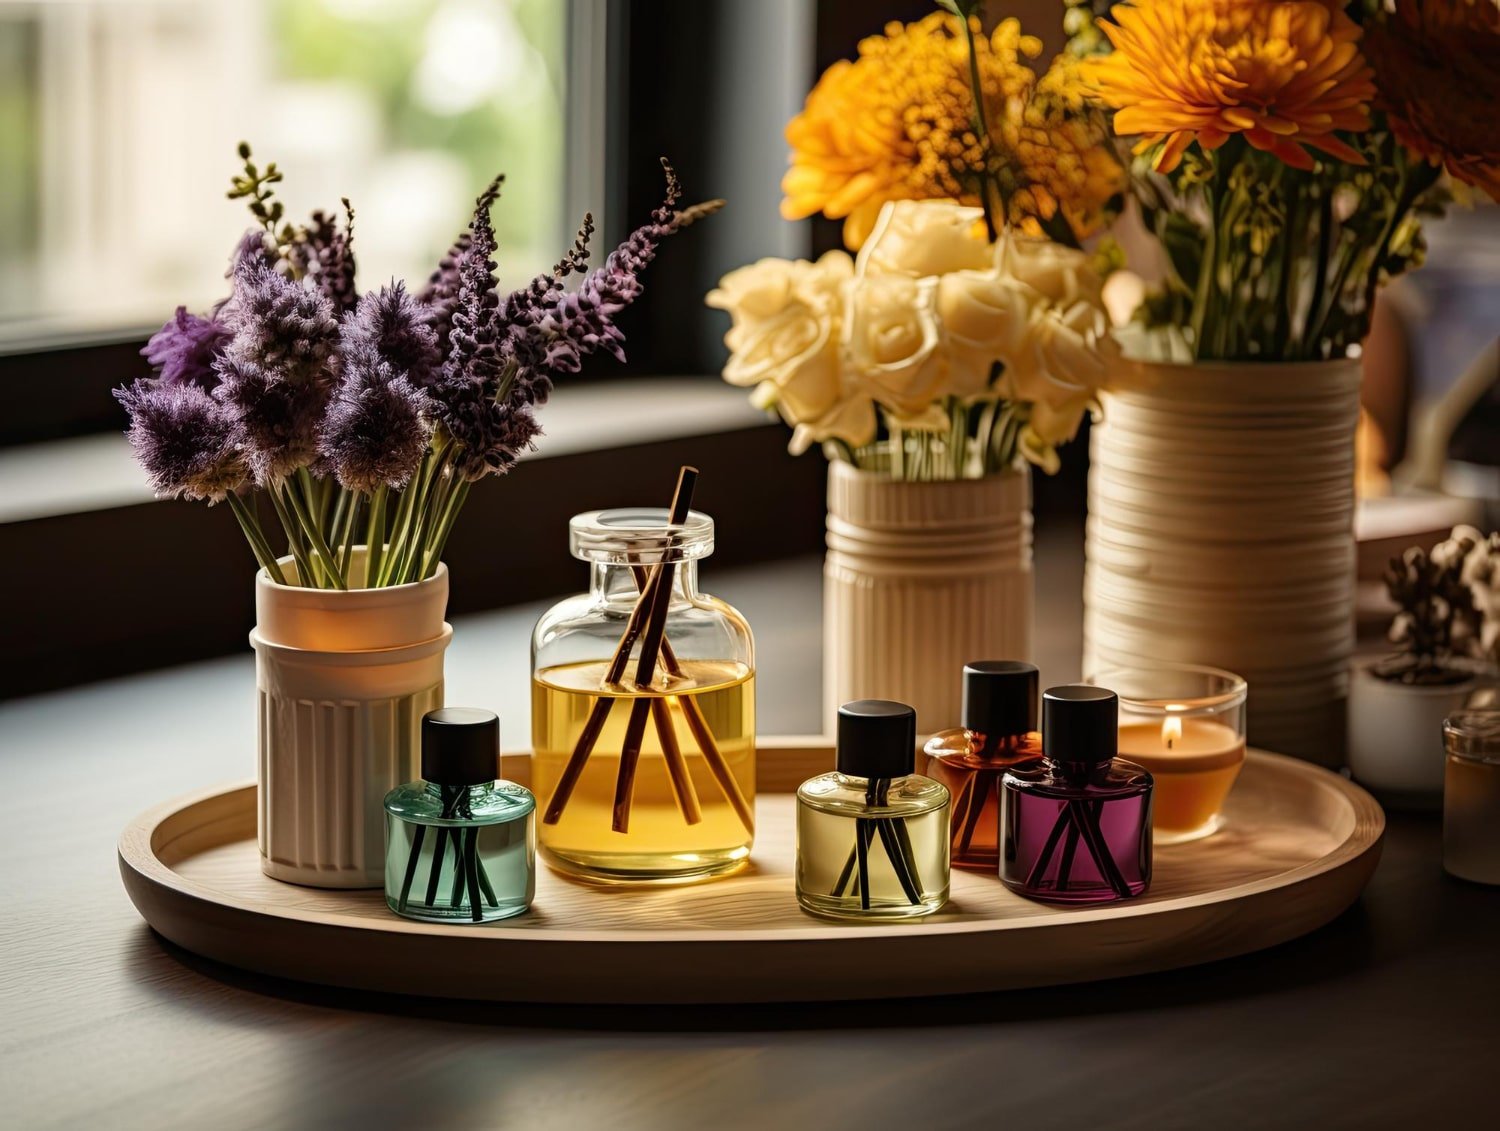 Discover Newell Brands Home Fragrance Scents for Every Home